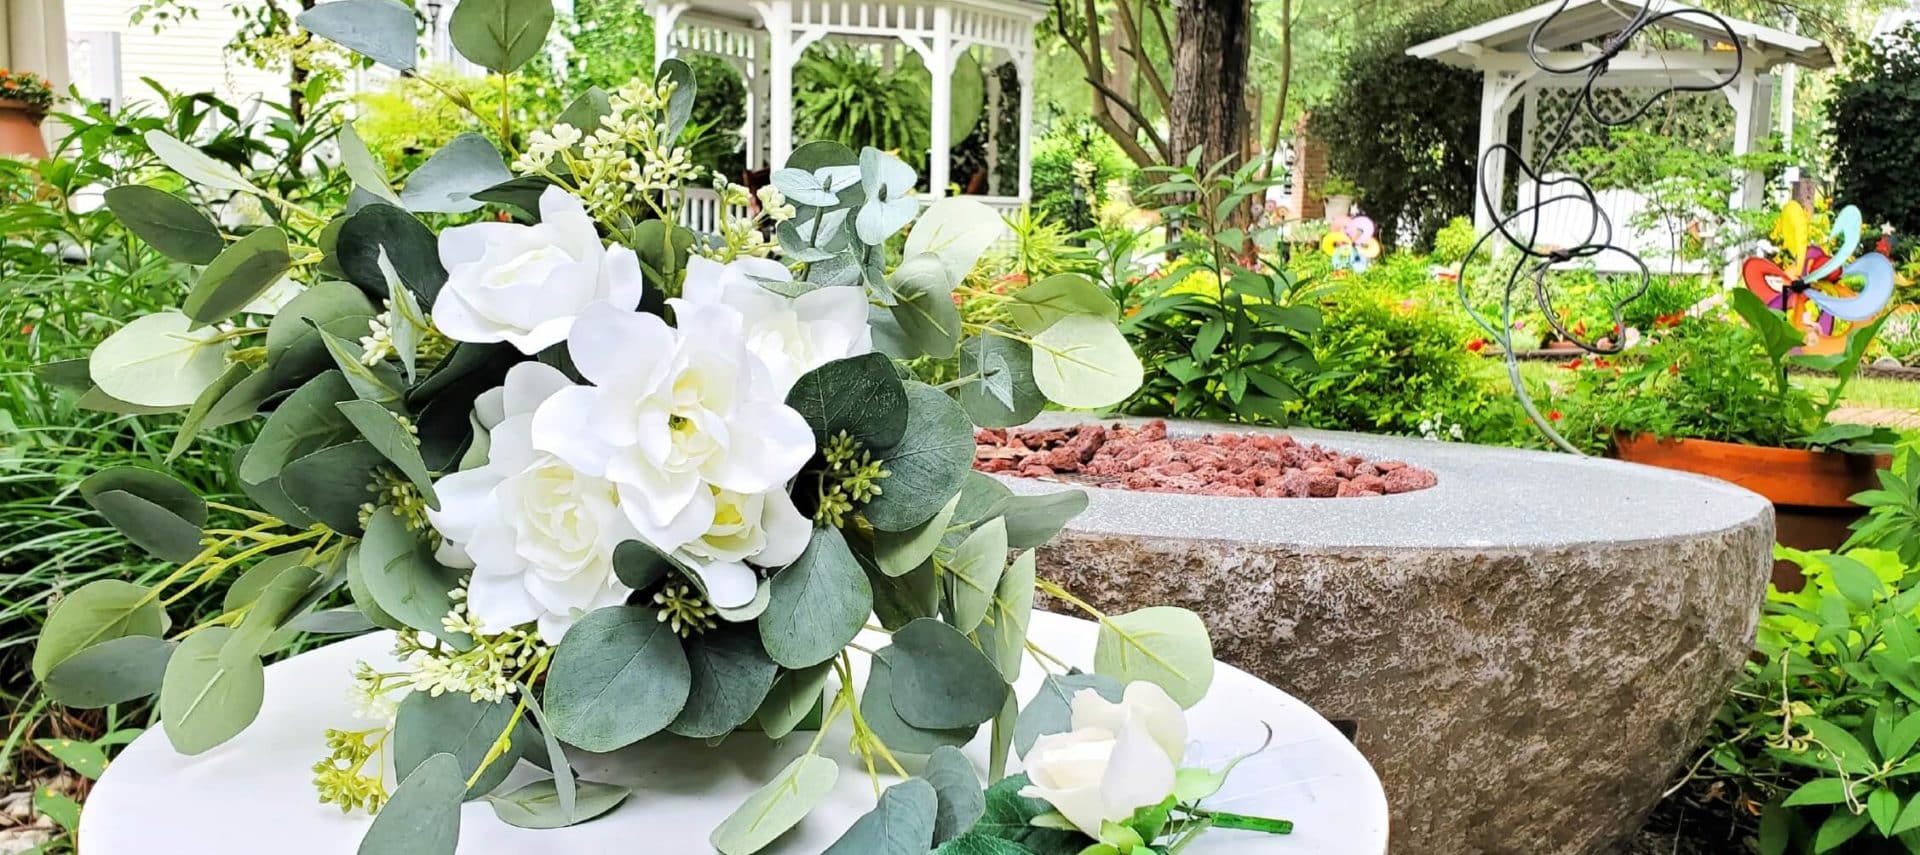 White and green wedding bouquet in garden setting